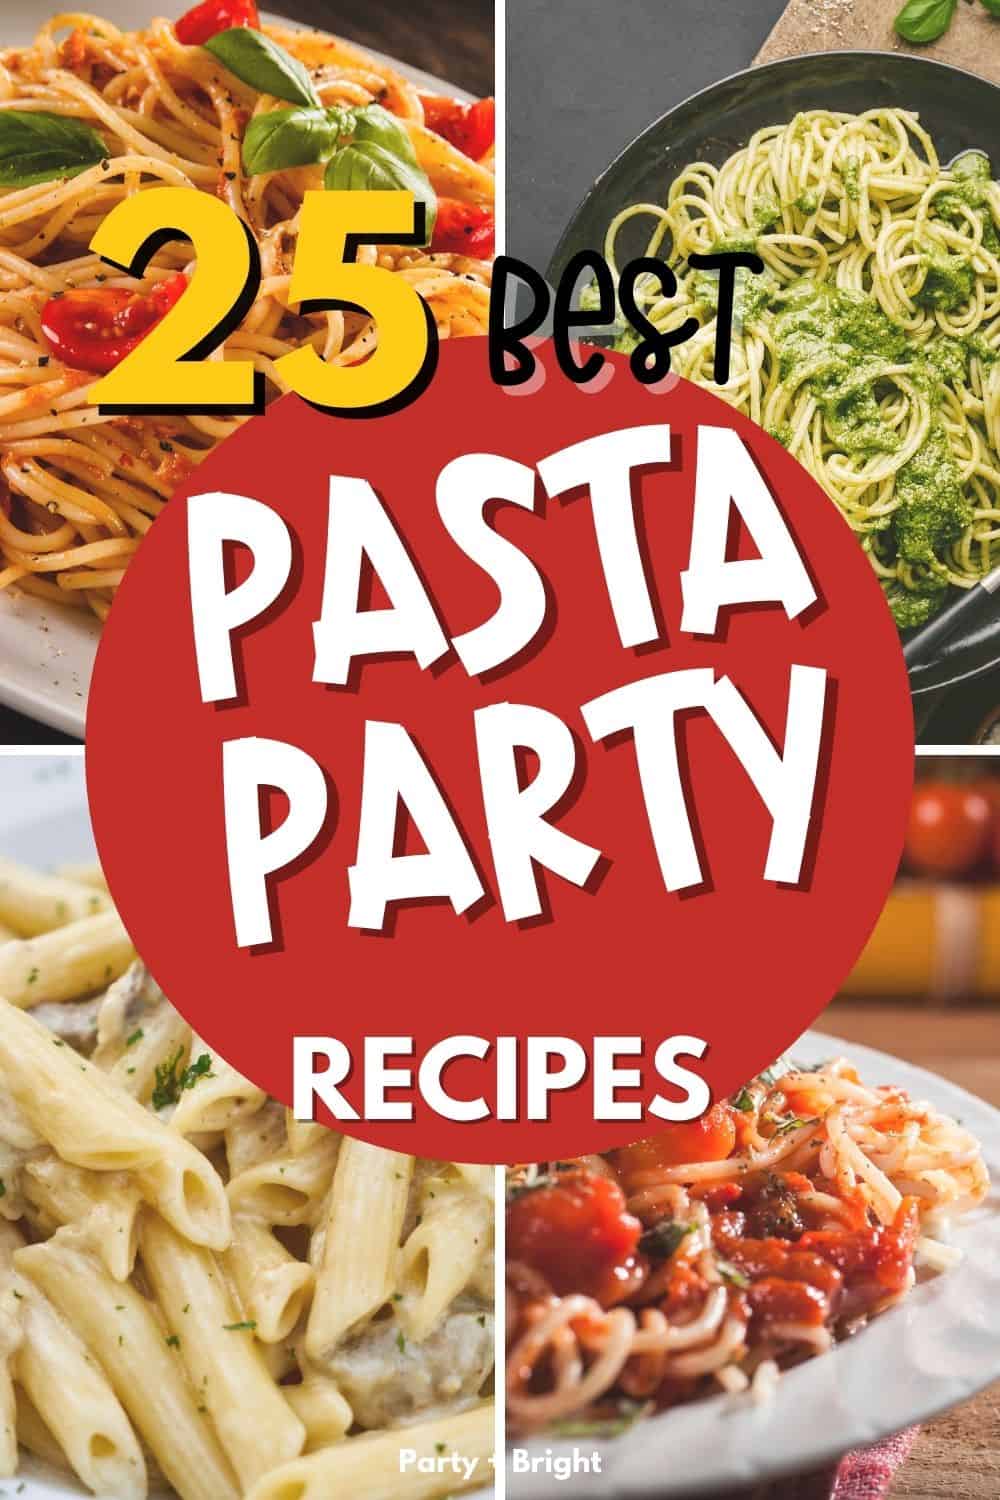 25 Simple Pasta Party Recipes for a Impromptu Dinner Party